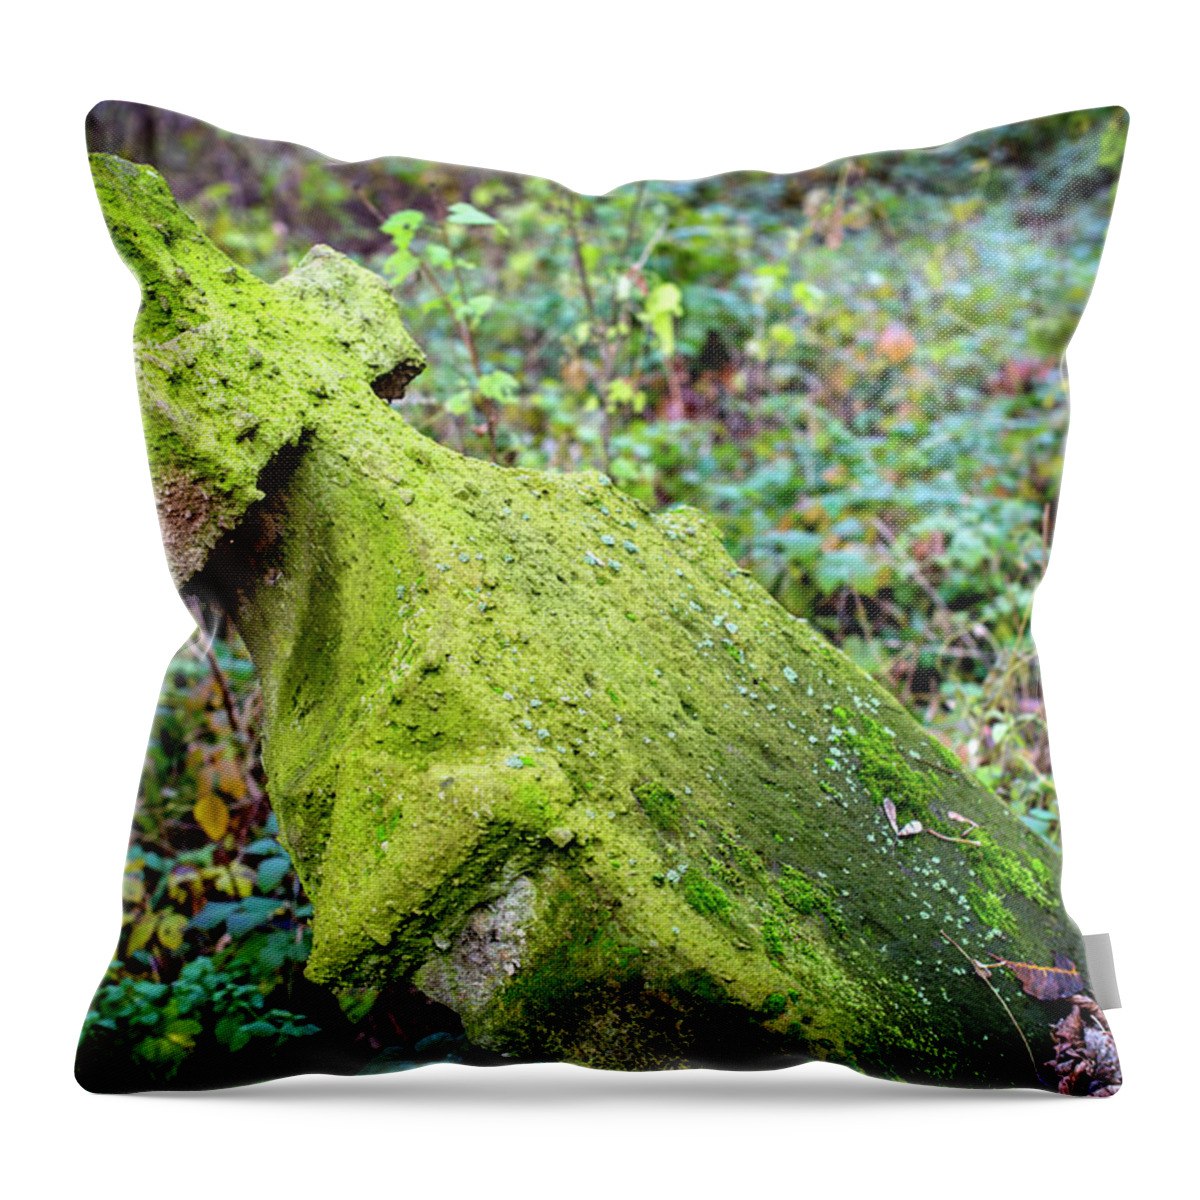 Spooky Throw Pillow featuring the photograph Old Stone Cross In The Autumn Foliage by Yorkfoto